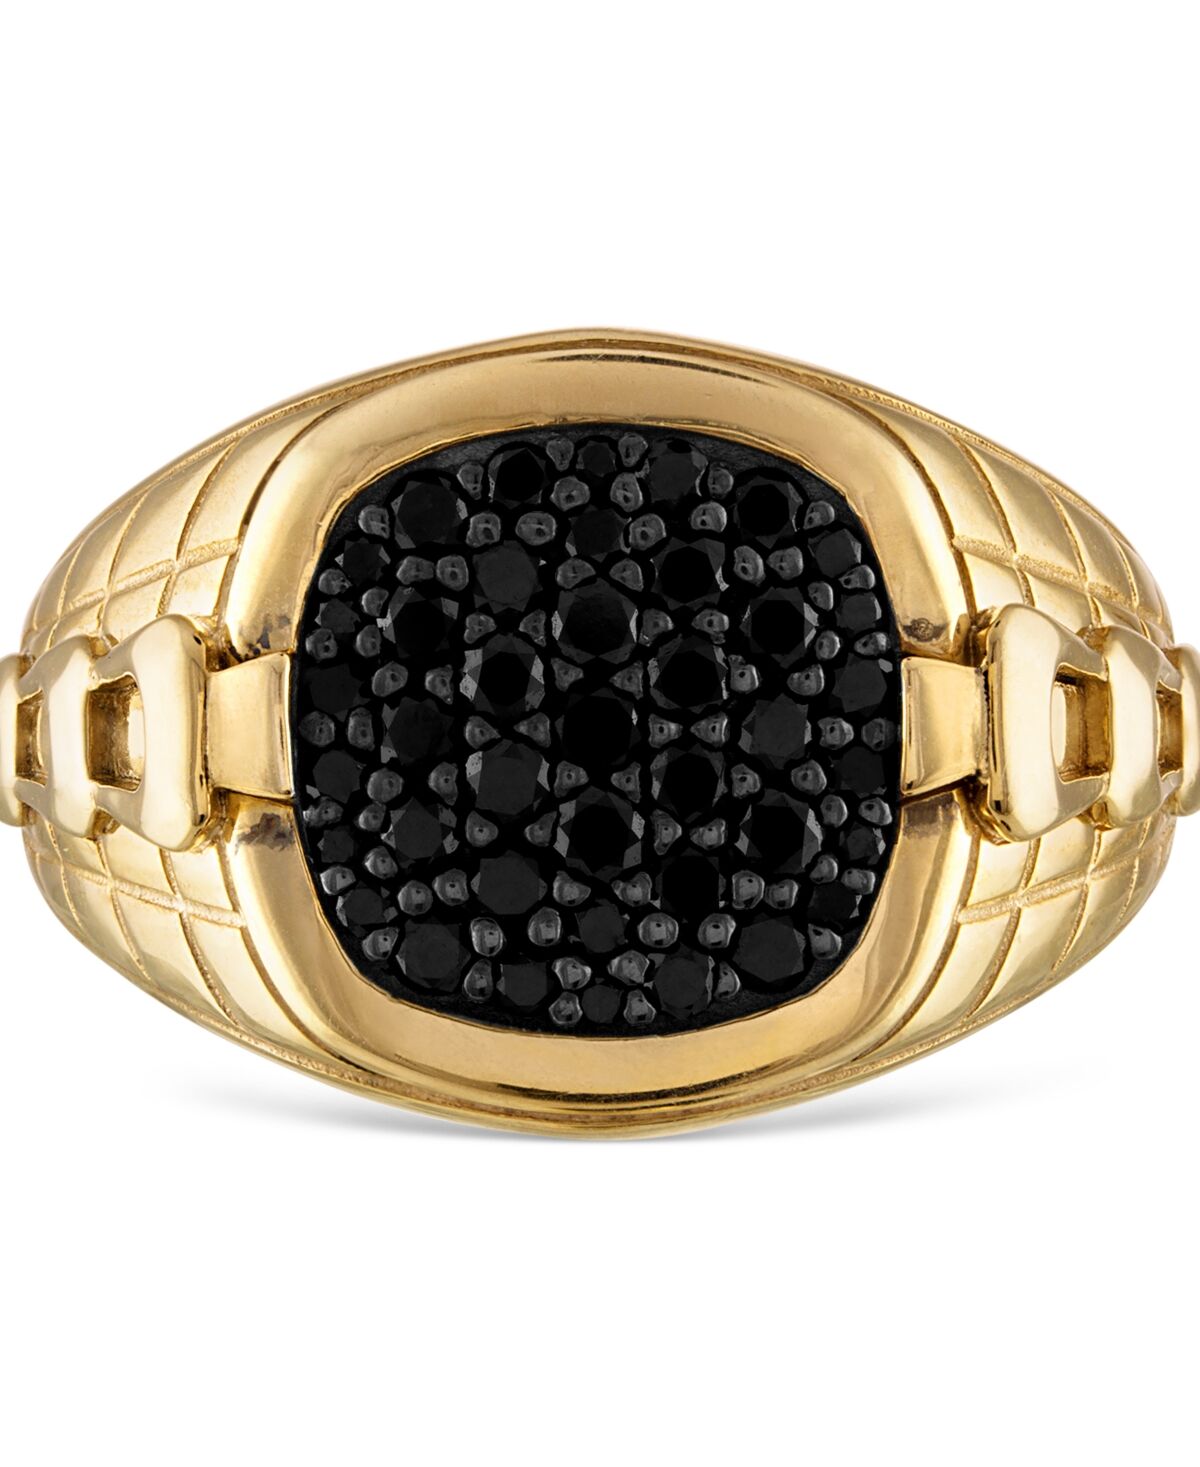 Bulova Men's Classic Black Diamond (1/2 ct. t.w.) Ring in 14k Gold-Plated Sterling Silver - Gold